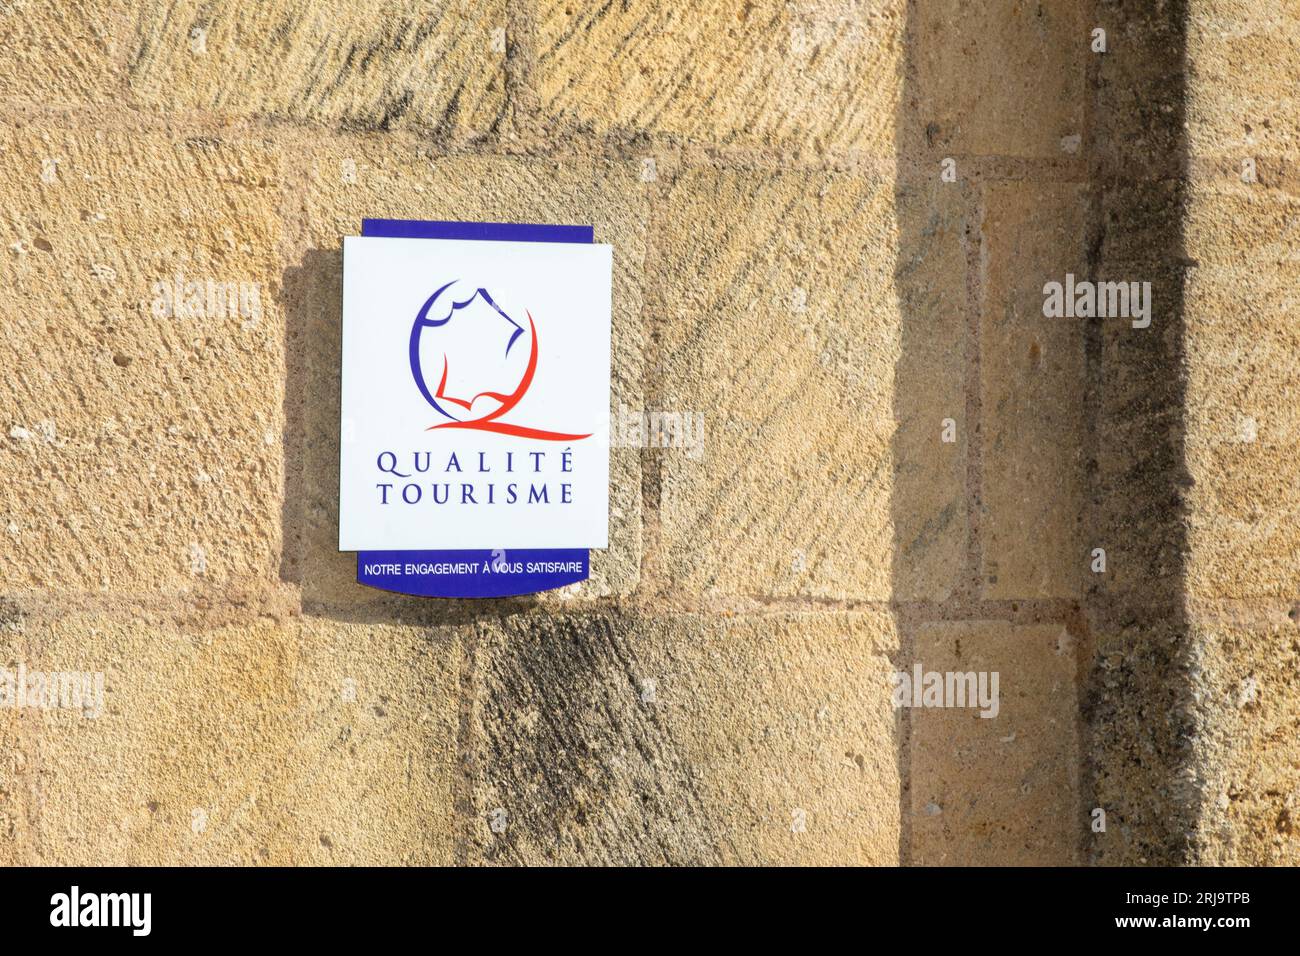 saint-emilion , France -  08 19 2023 : Qualite Tourisme logo brand and text sign on wall facade state france guaranteed of French hospitality and qual Stock Photo